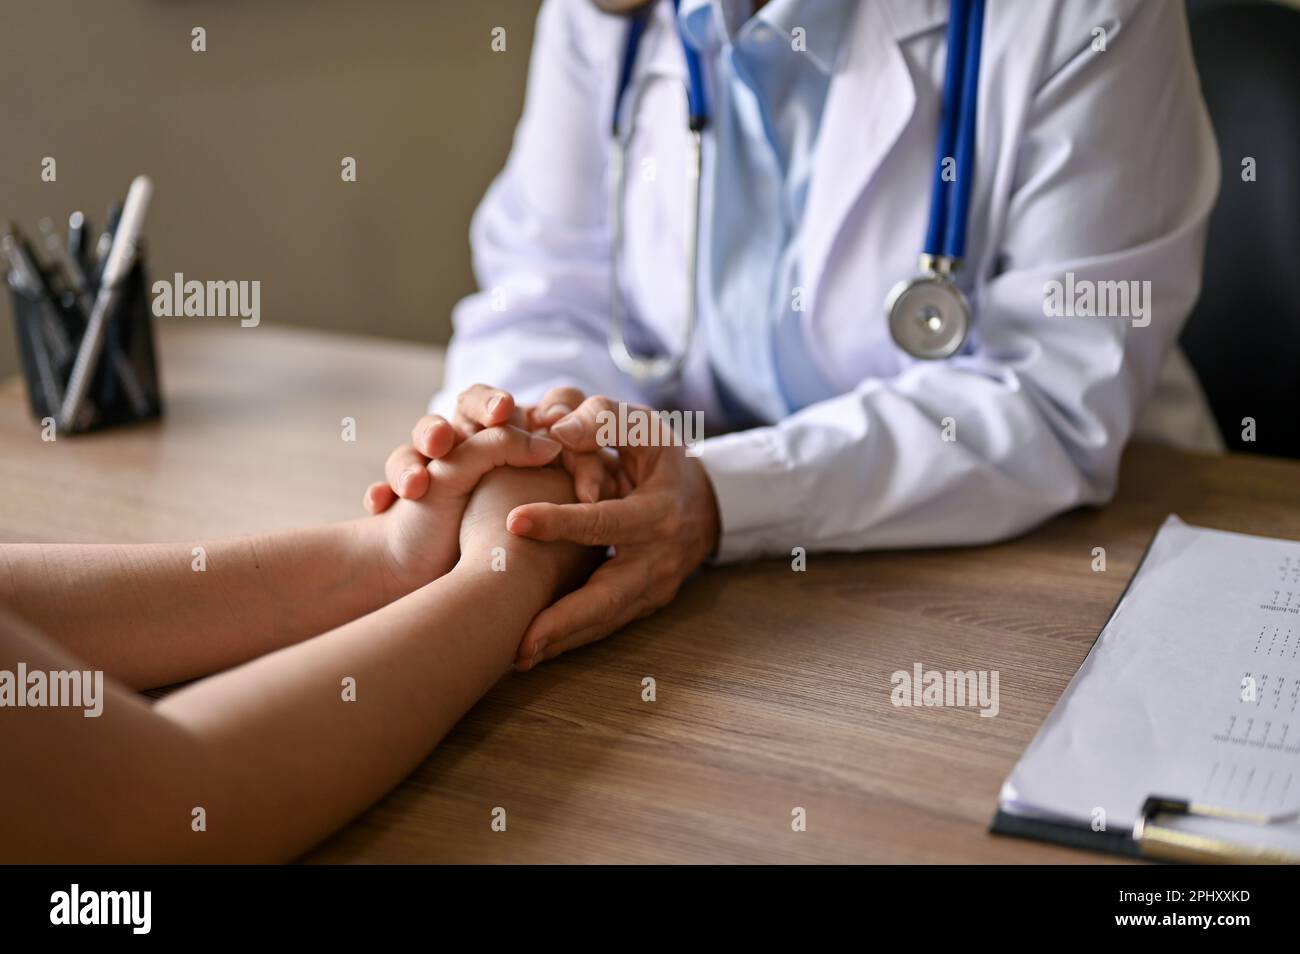 Close-up image of a doctor holding a patient's hands to comfort and reassure her during the medical consultation. Stock Photo